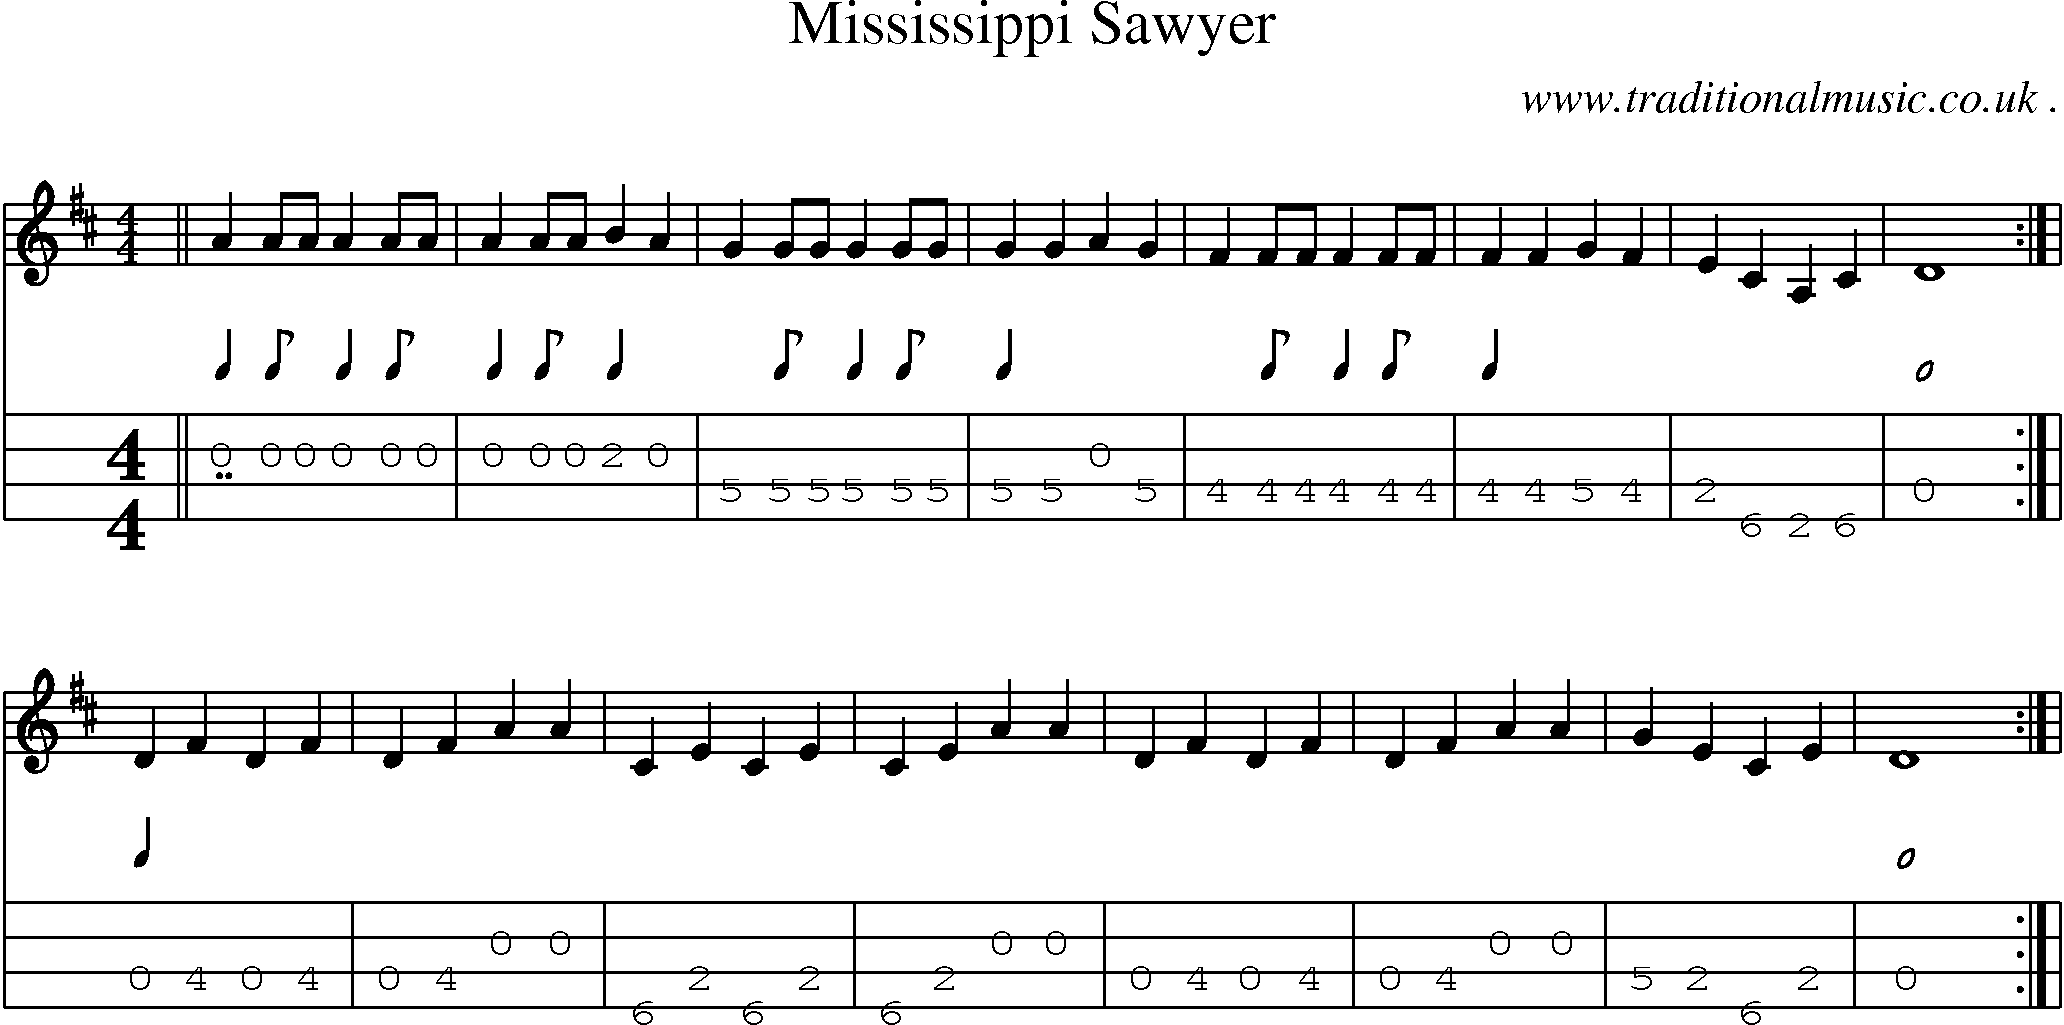 Music Score and Guitar Tabs for Mississippi Sawyer